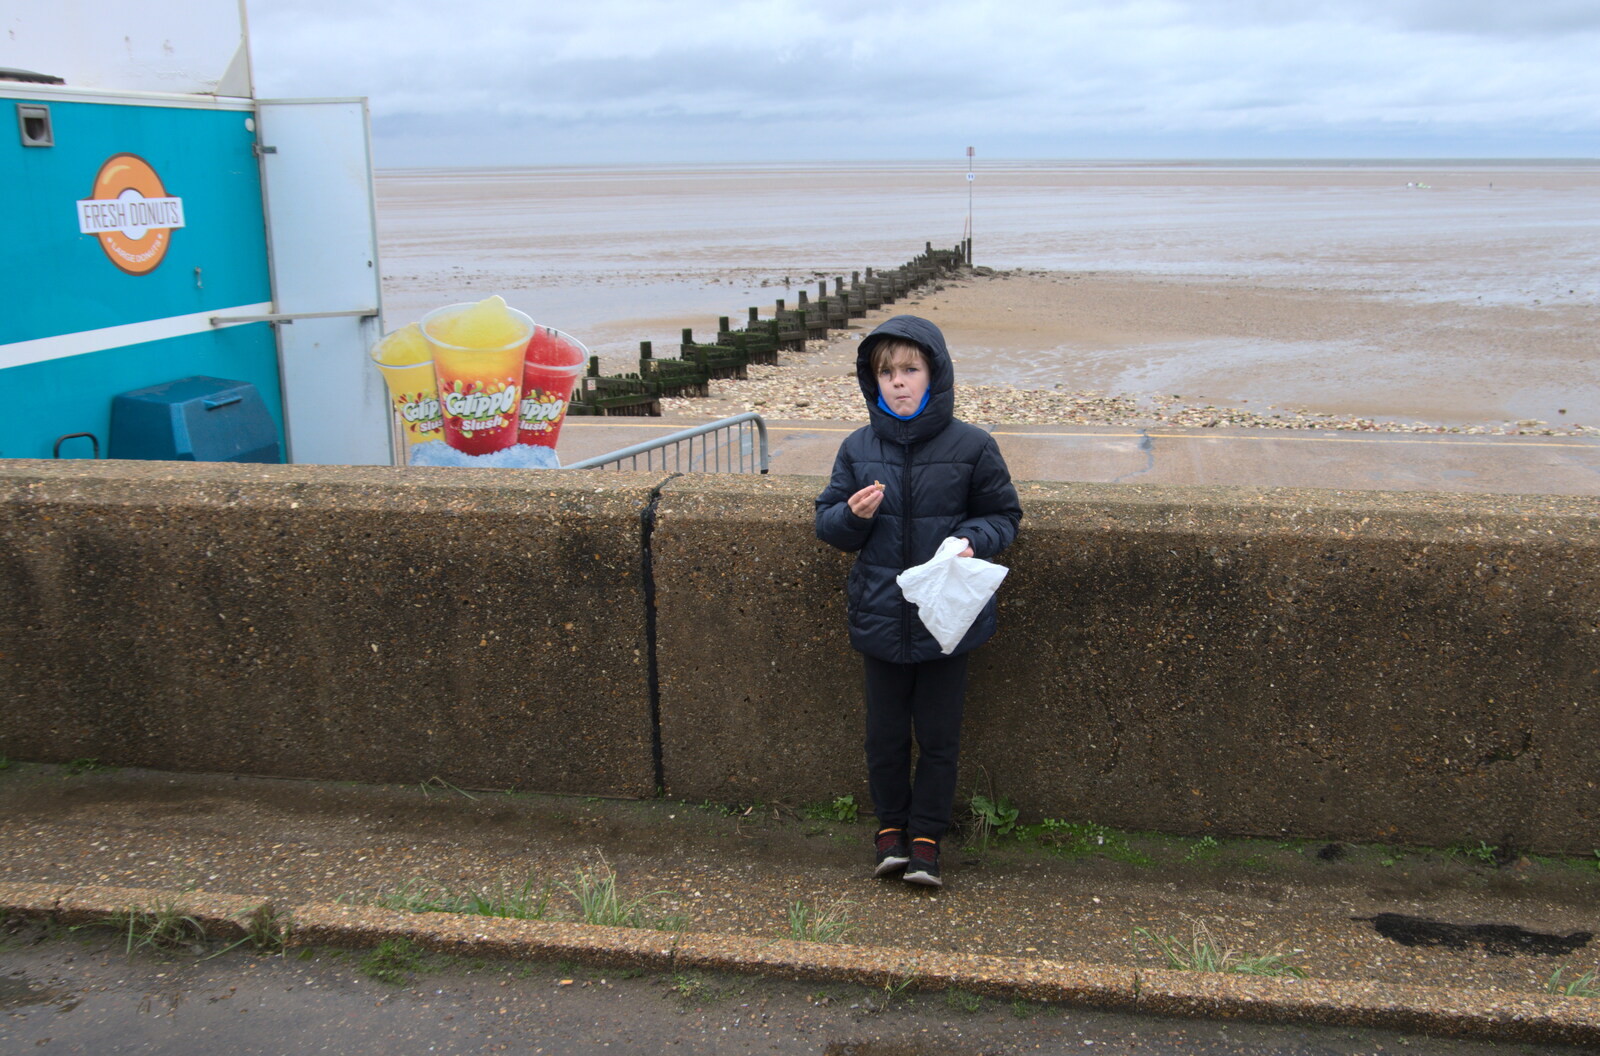 Harry eats a mini doughnut by the wall from A Postcard From Kings Lynn and "Sunny Hunny" Hunstanton, Norfolk - 31st October 2020